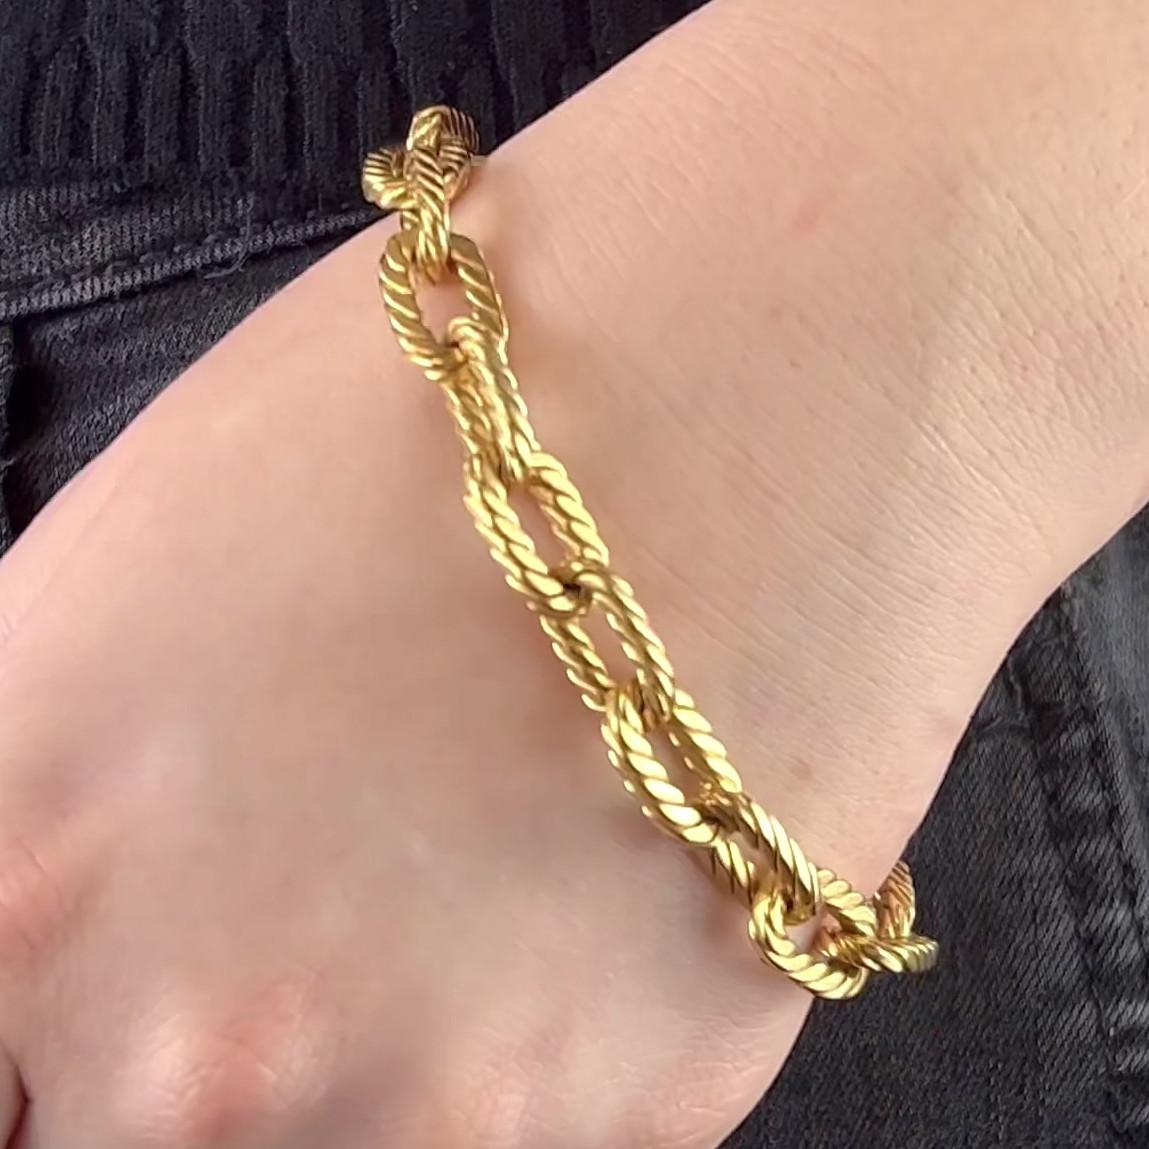 One Vintage French 18 Karat Yellow Gold Twisted Link Bracelet. Crafted in 18 karat yellow gold with French hallmarks. Circa 1960s. The bracelet measures 8 1/4 inches in length. 

About this Item: Relive the era when style took a twist in France